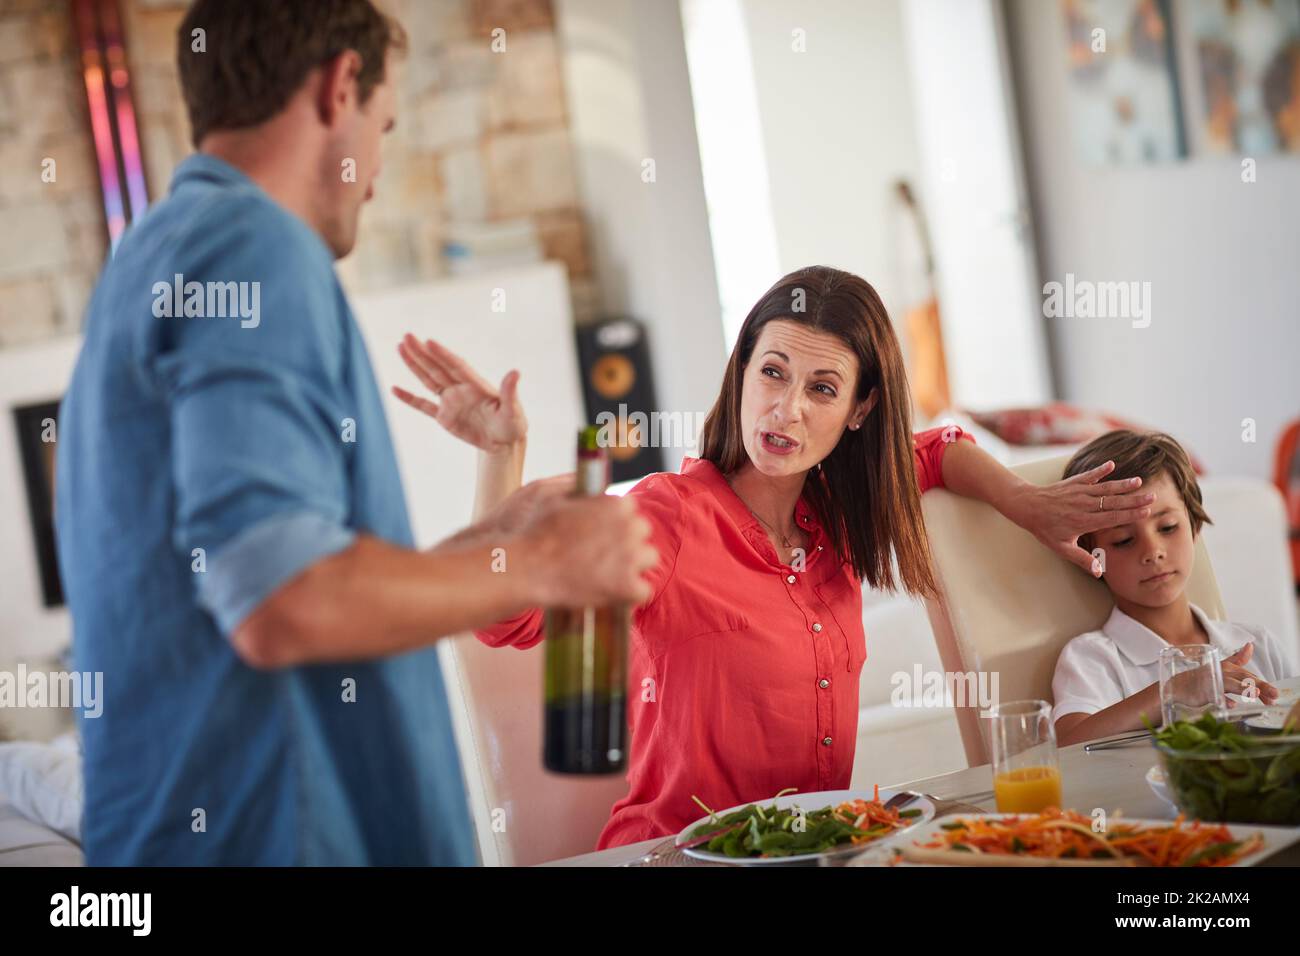 Do you want your children to see you like this. Shot of a drunk man and his wife arguing in front of their children during lunch. Stock Photo